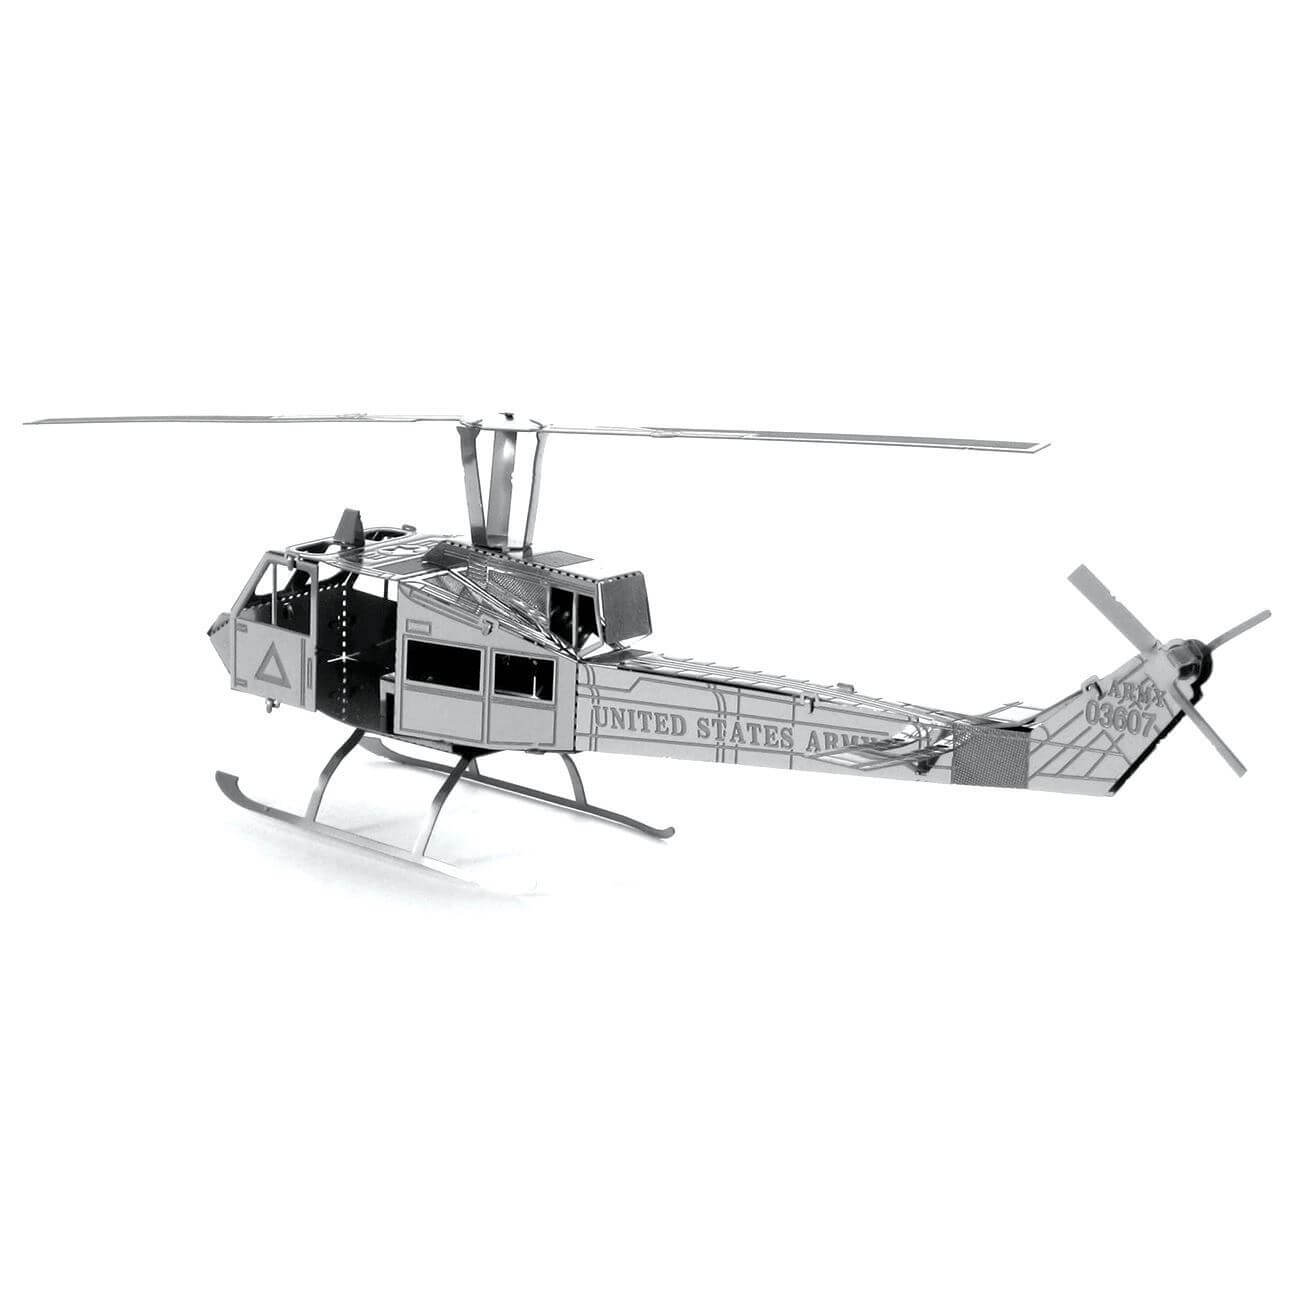 Side view of the helicopter model kit.